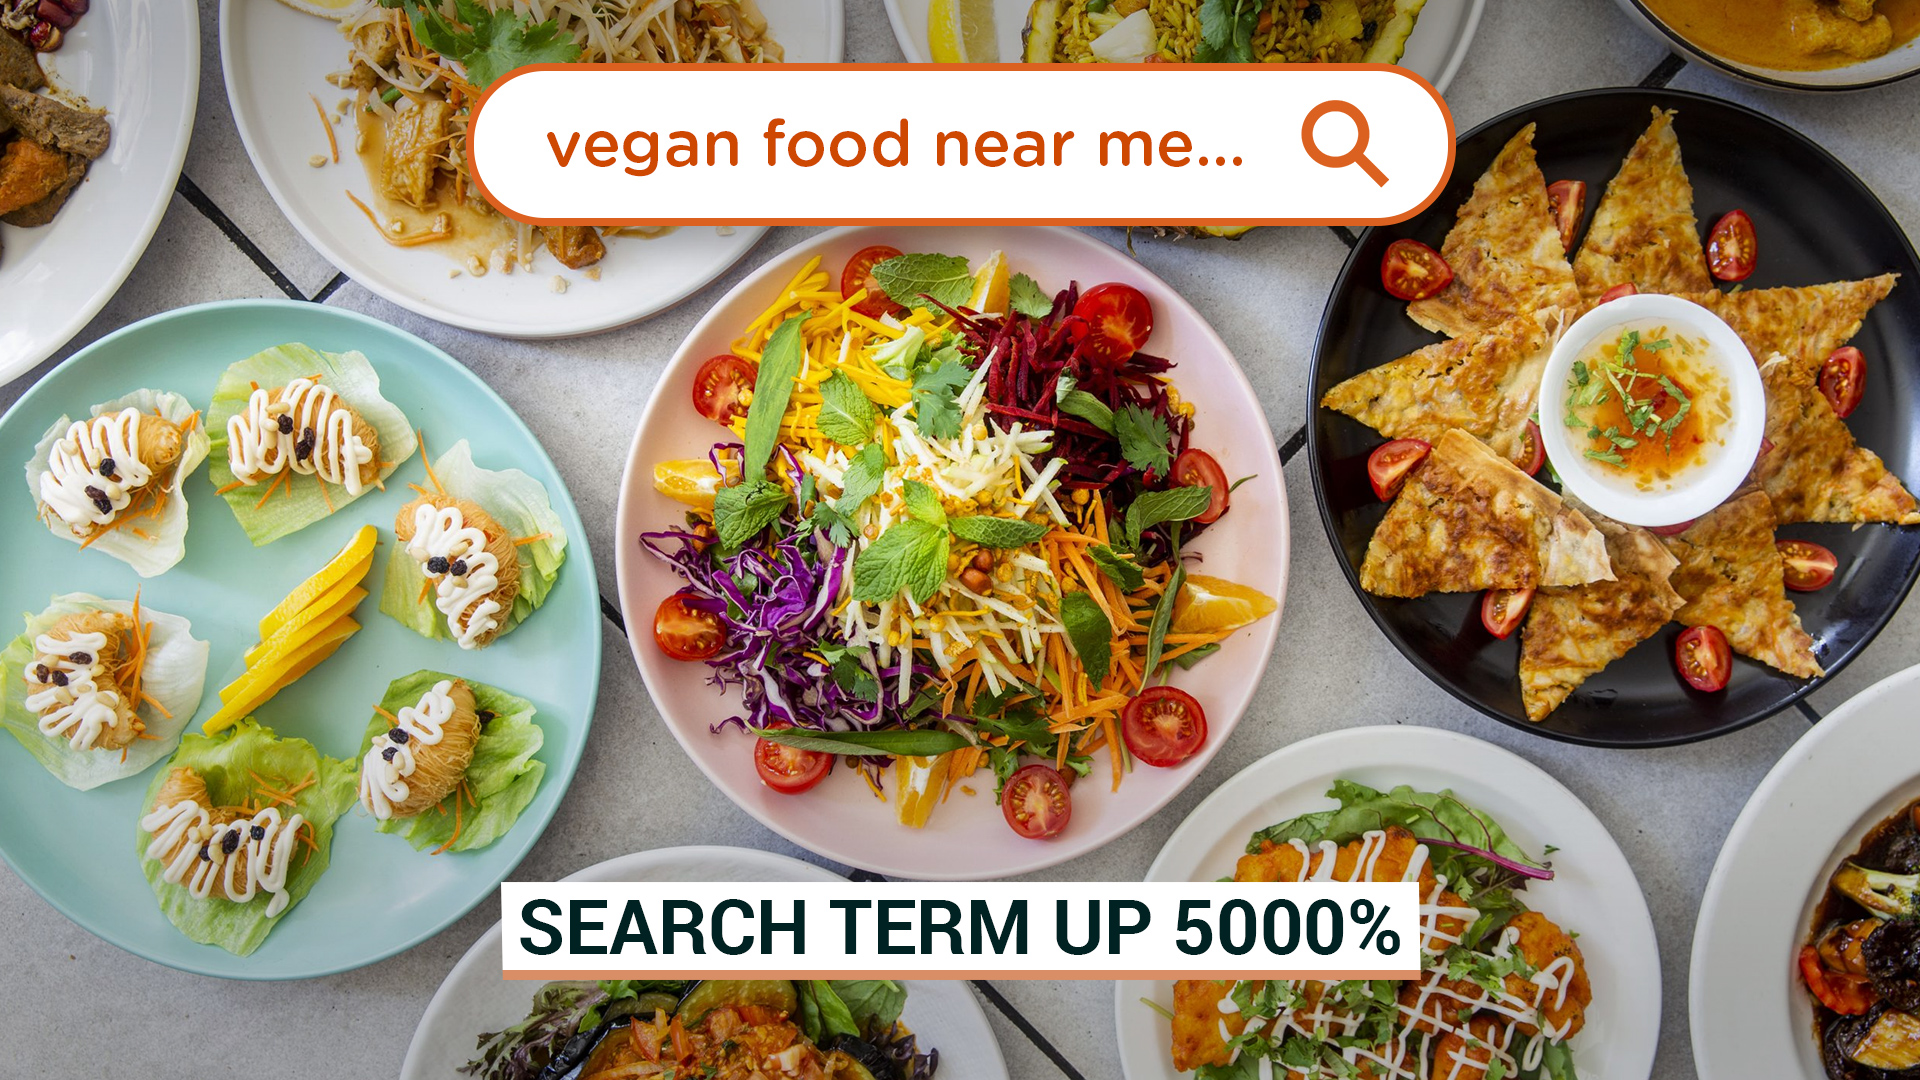 Discover Vegan Food Near You on Instagram: Be sure to check out